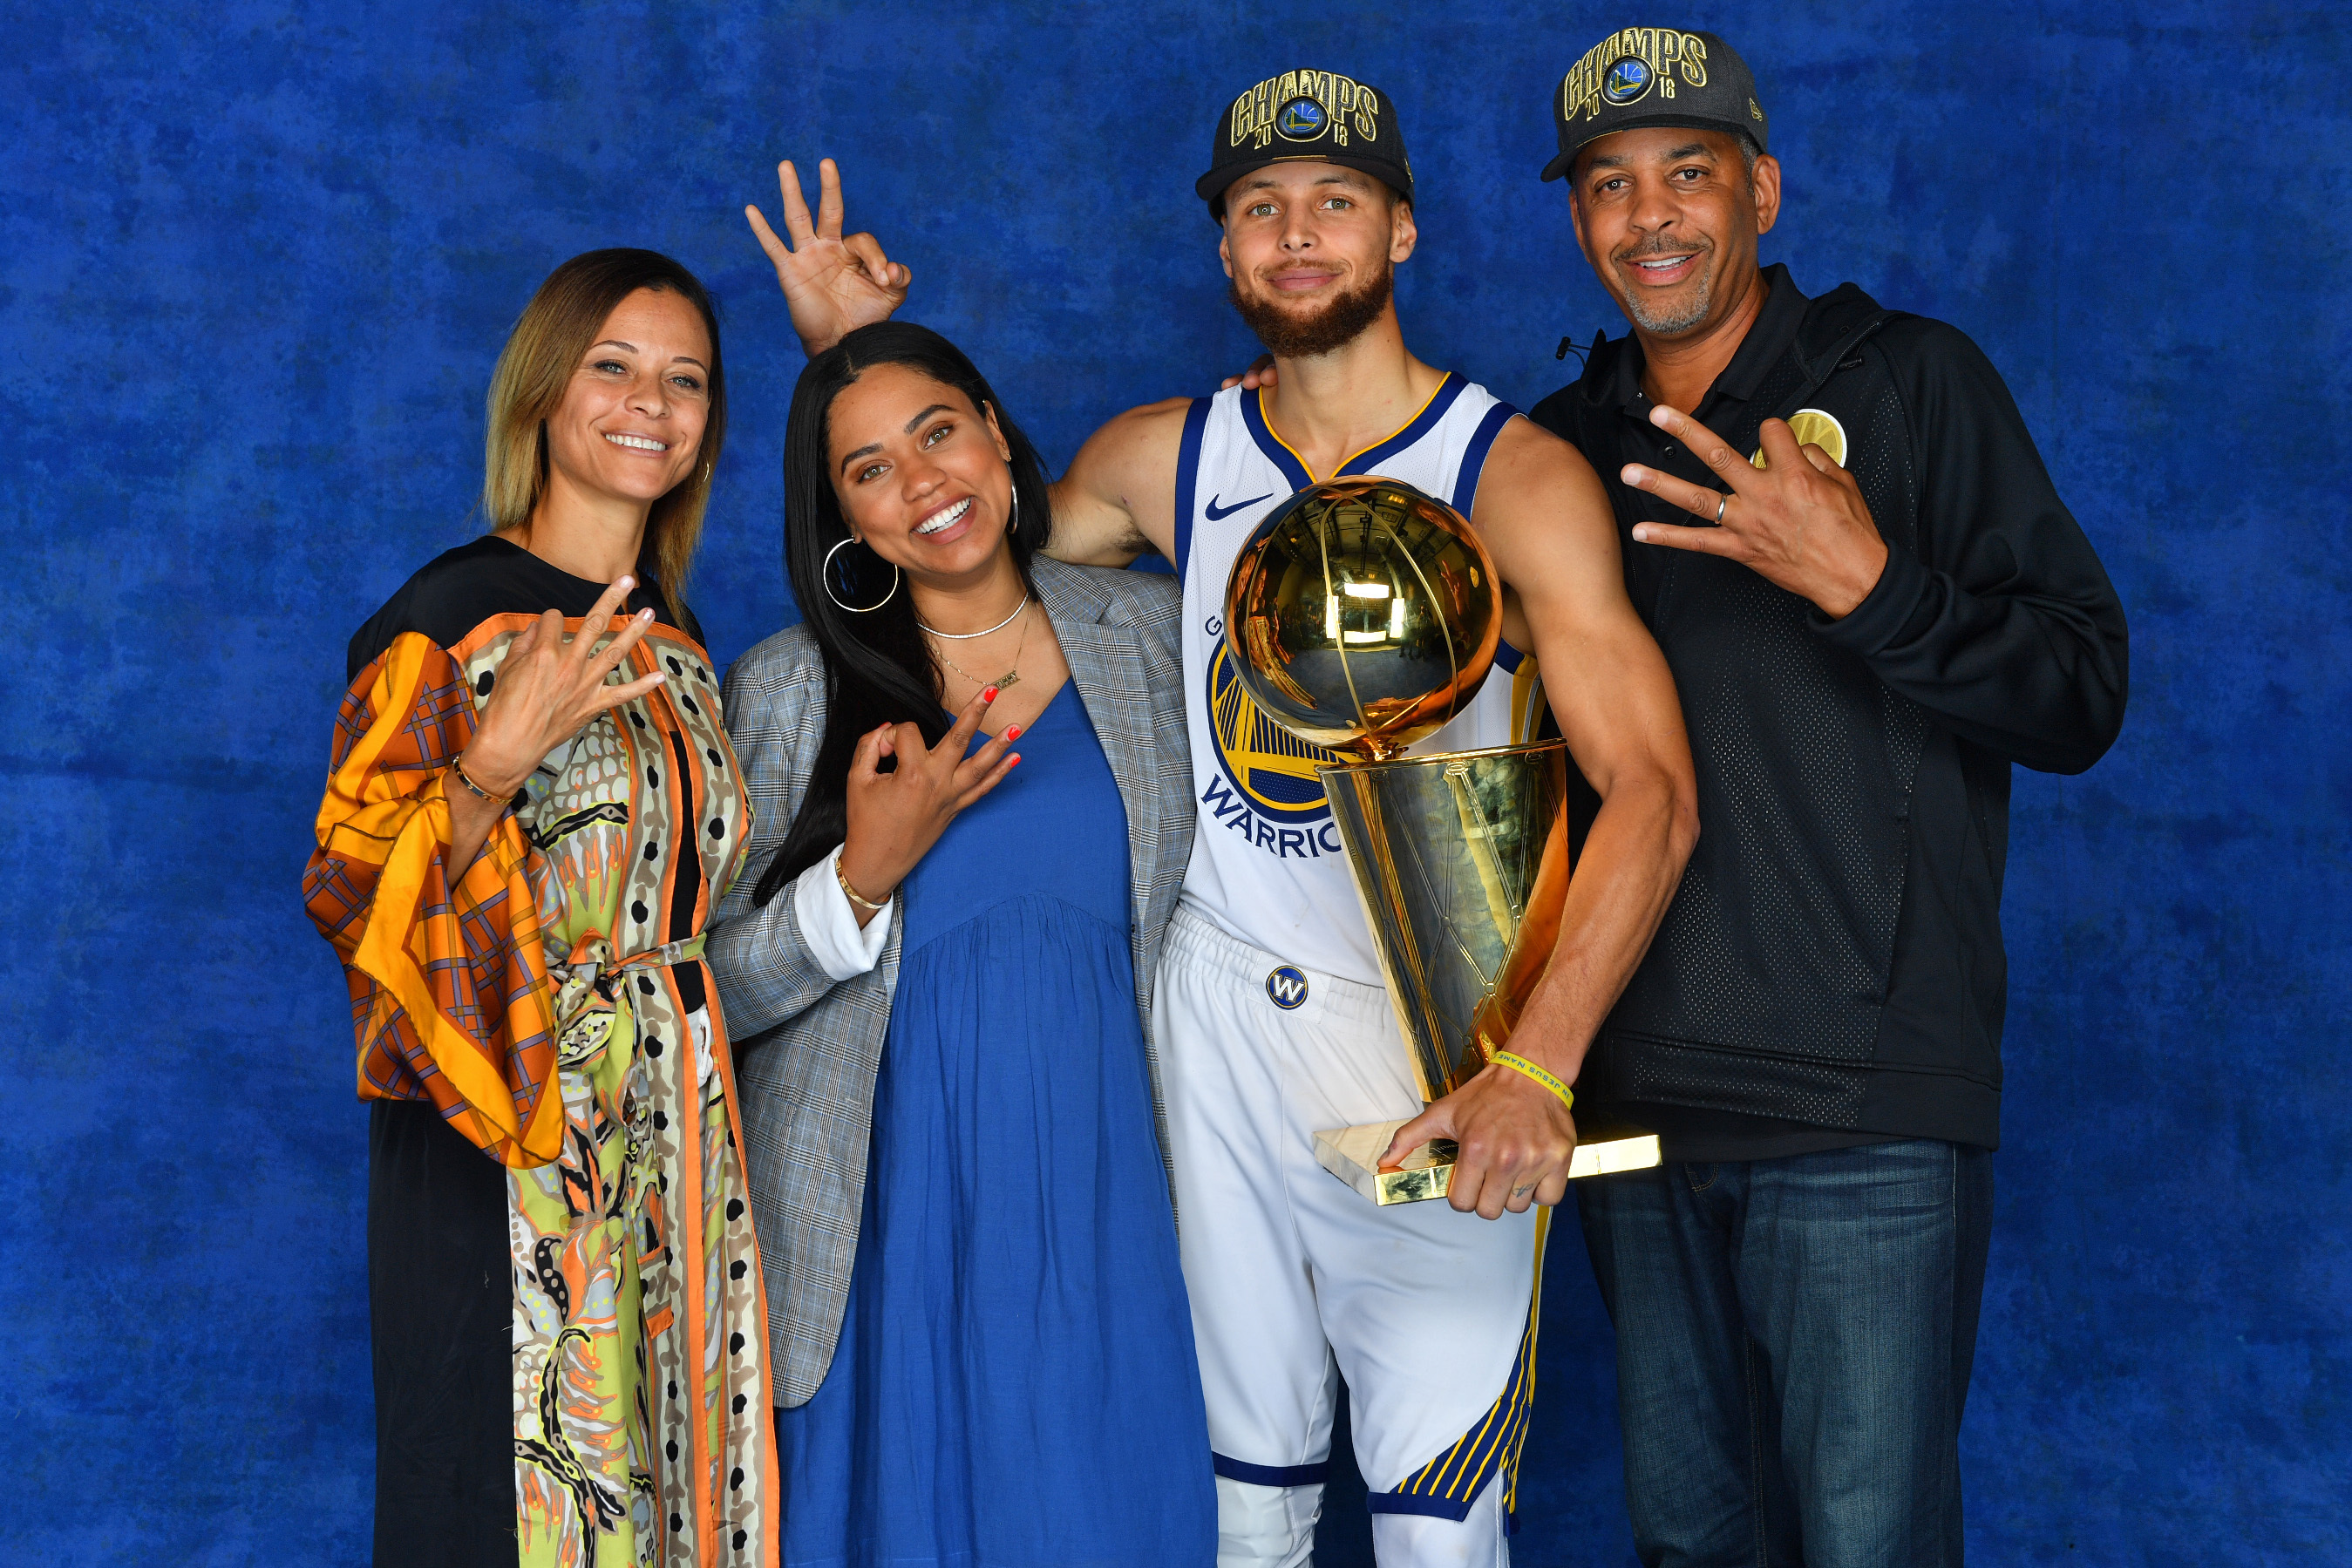 Steph Curry Parents: Dell and Sonya's Marriage + Their Divorce